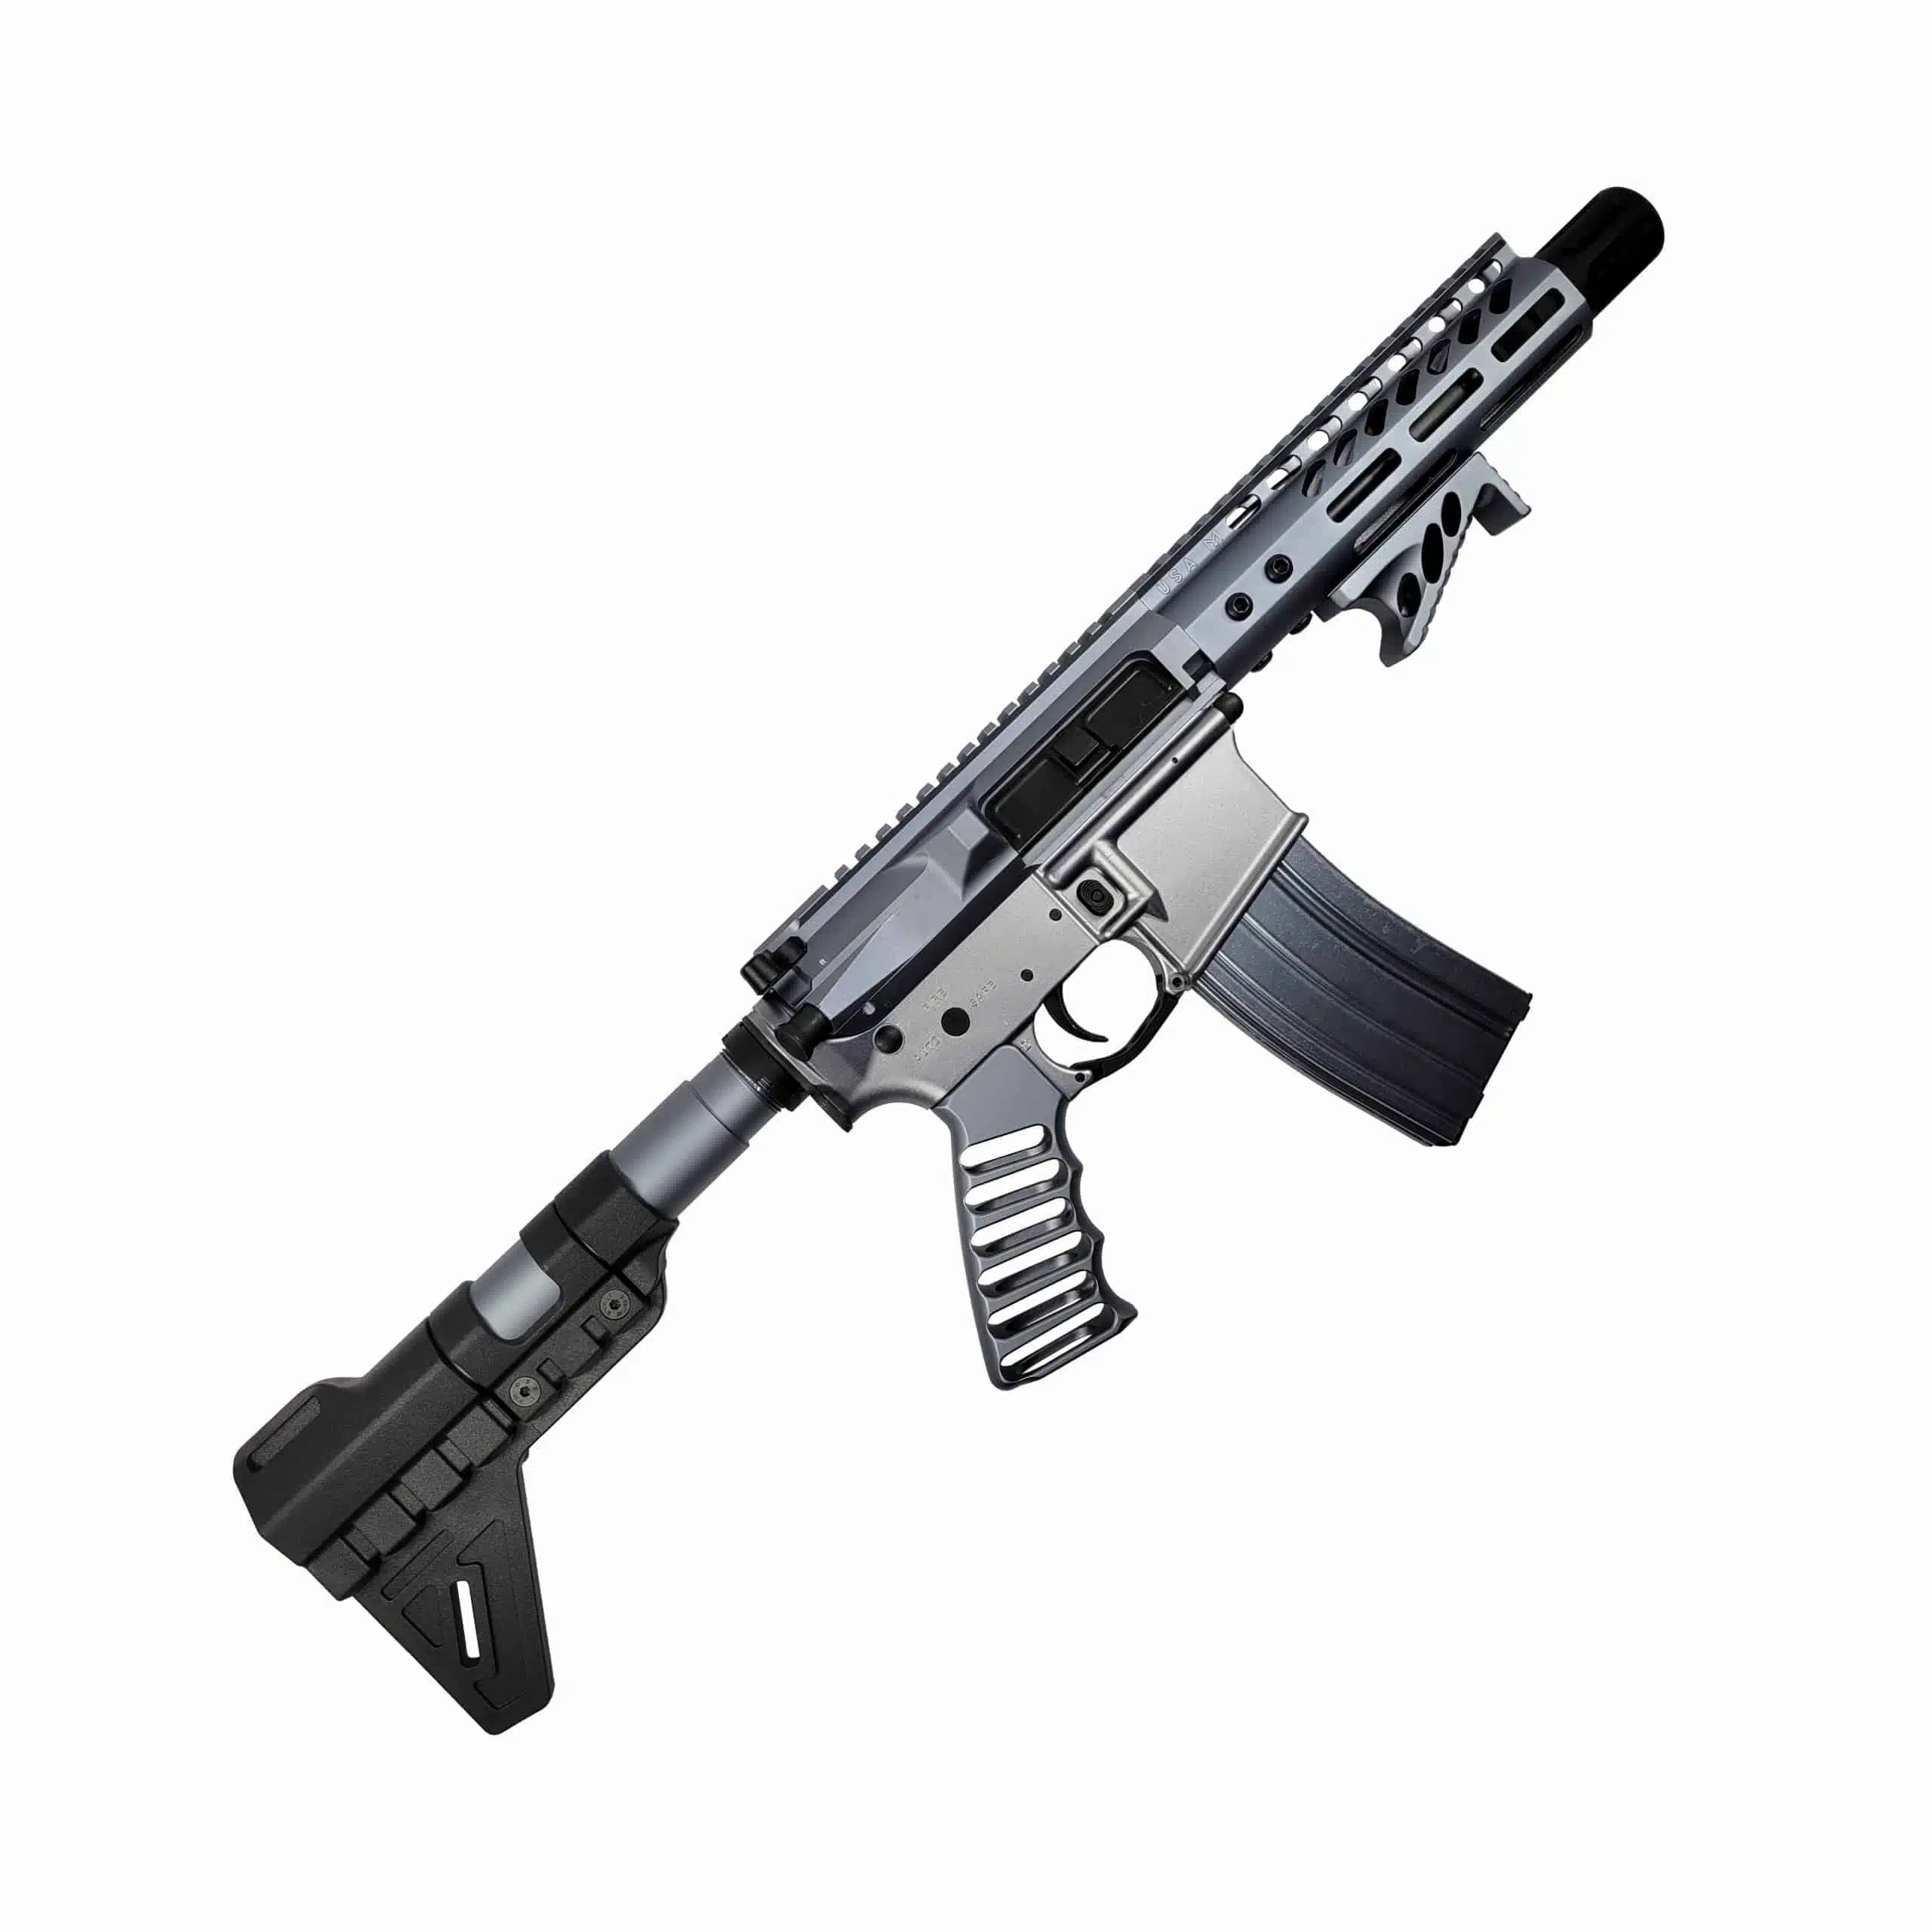 The Grey Ghost AR-15 Pistol full Grey Anodize in 5.56